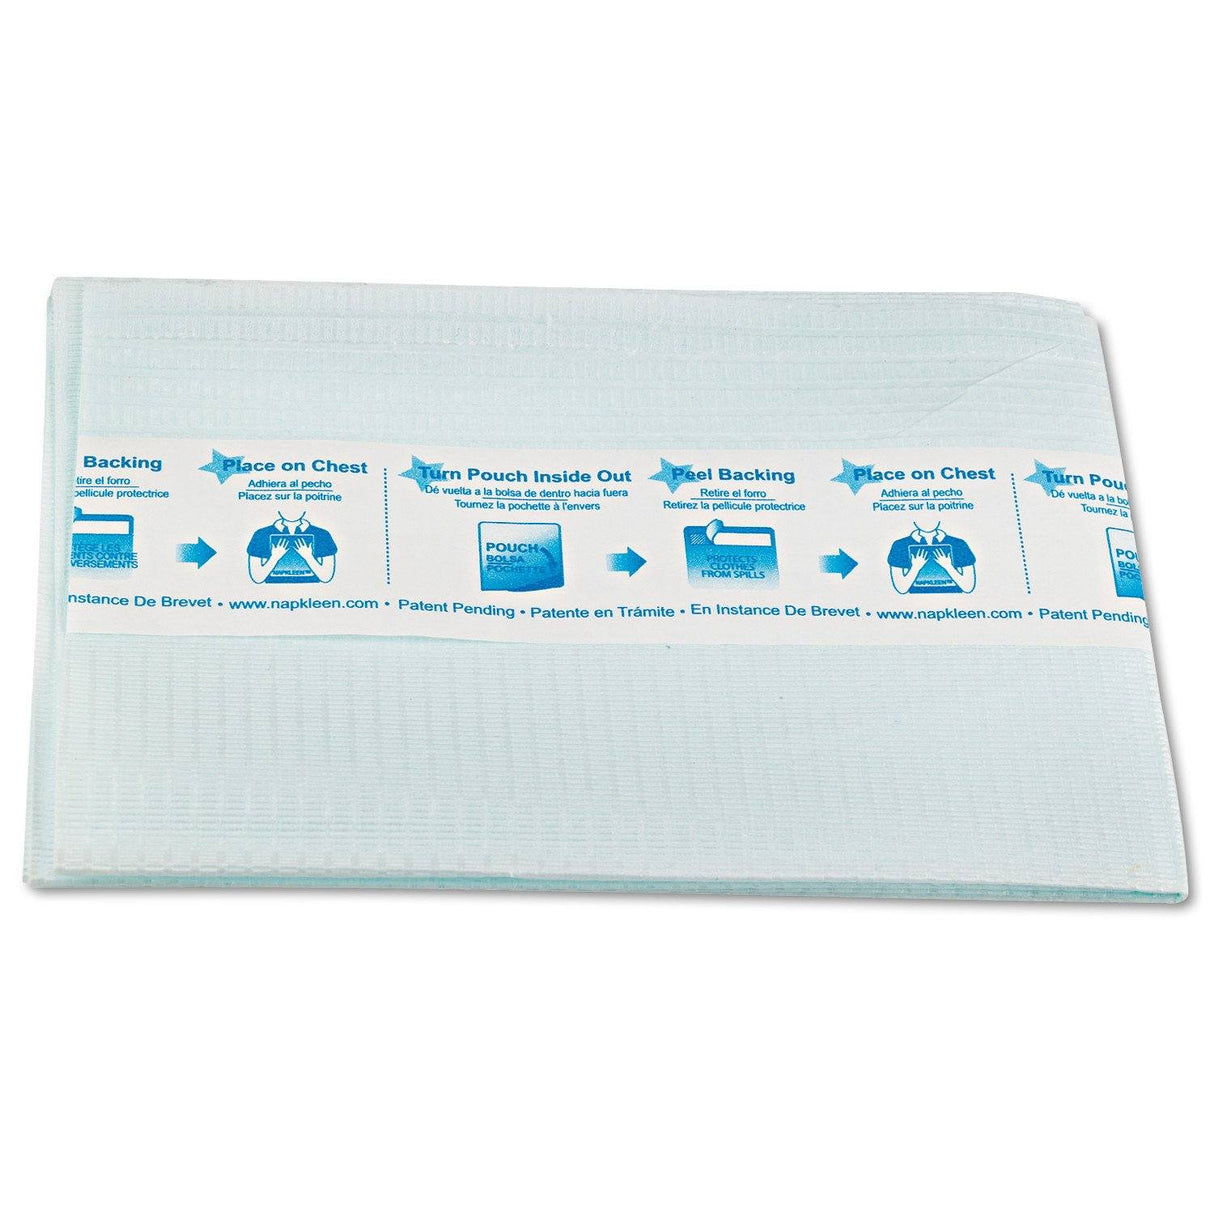 Image of Hermell Naplkleen Disposable Adult Bib, 13" x 18", Blue, Large